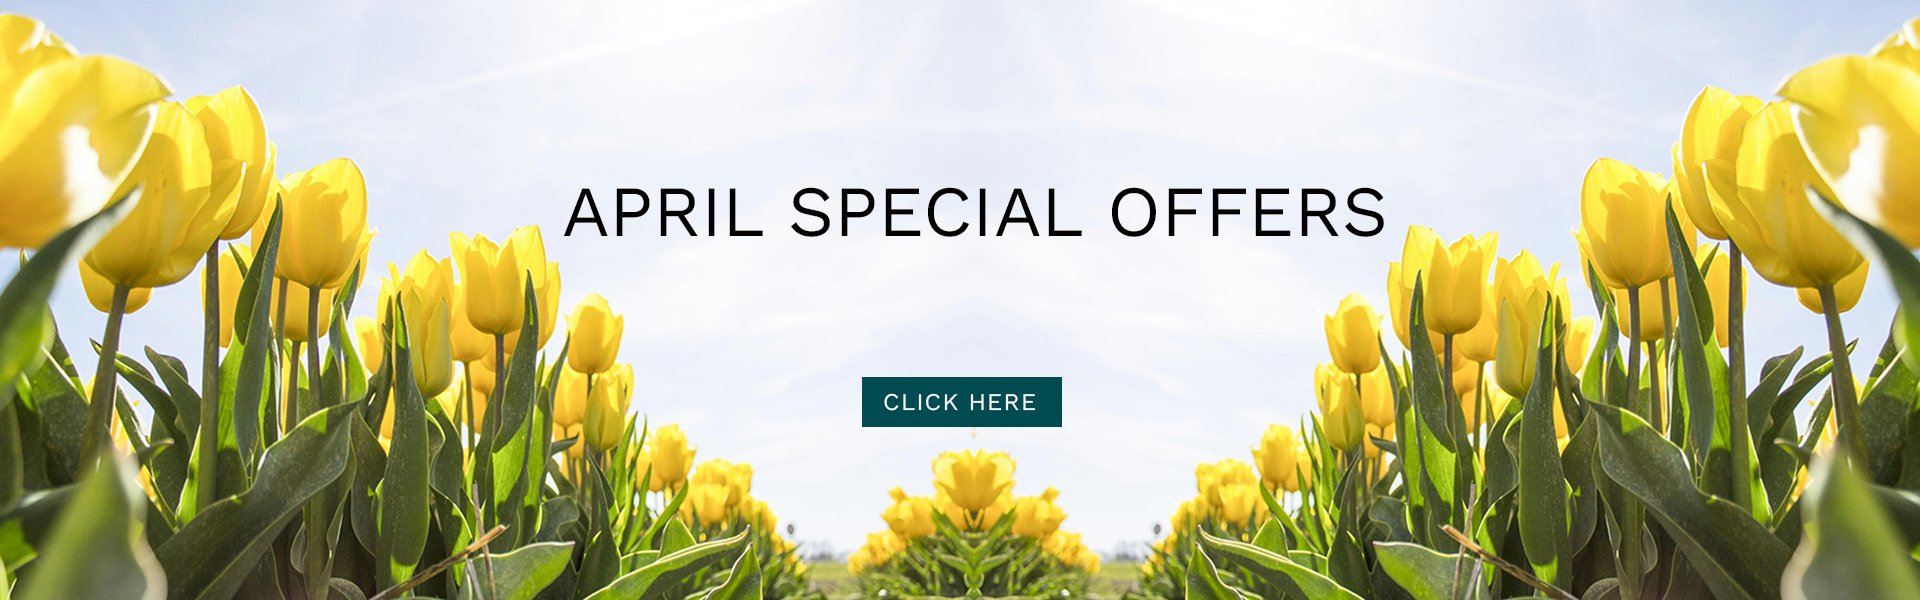 APRIL SPECIAL OFFERS AT RITUAL SKIN & BEAUTY CLINIC IN HAMPSHIRE